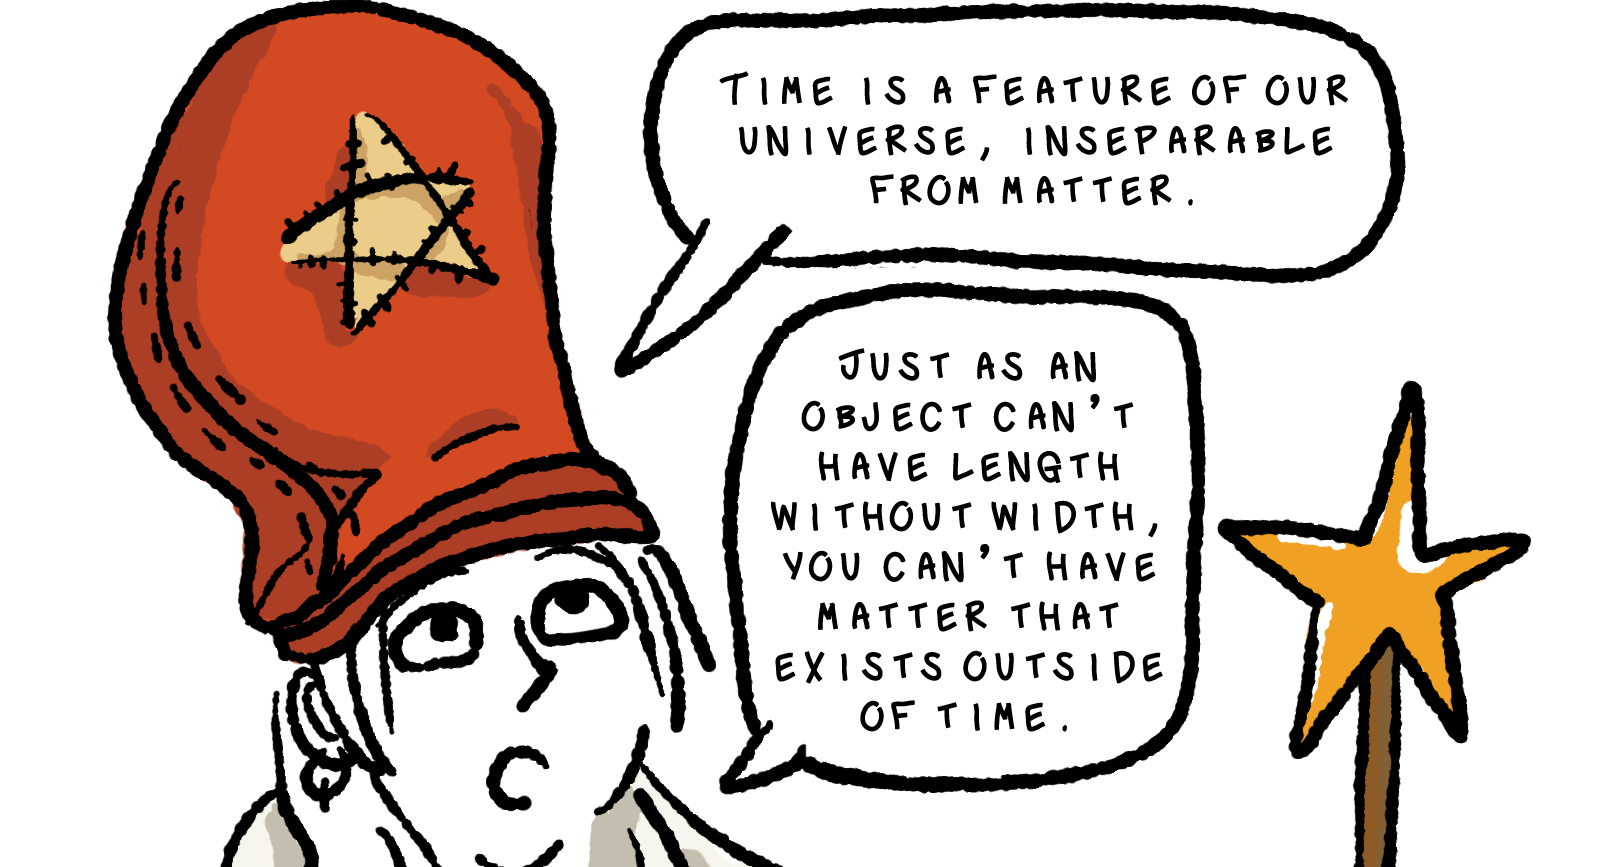 In a borderless panel, Elk is wearing a large red hat with a yellow star on it, which a tiny arrow pionting at him suggests he is dressed up in reference to a time mage from Final Fantasy. While brandishing his yellow wand that also has a star motif, he explains, Time is a feature of our universe, inseparable from matter.